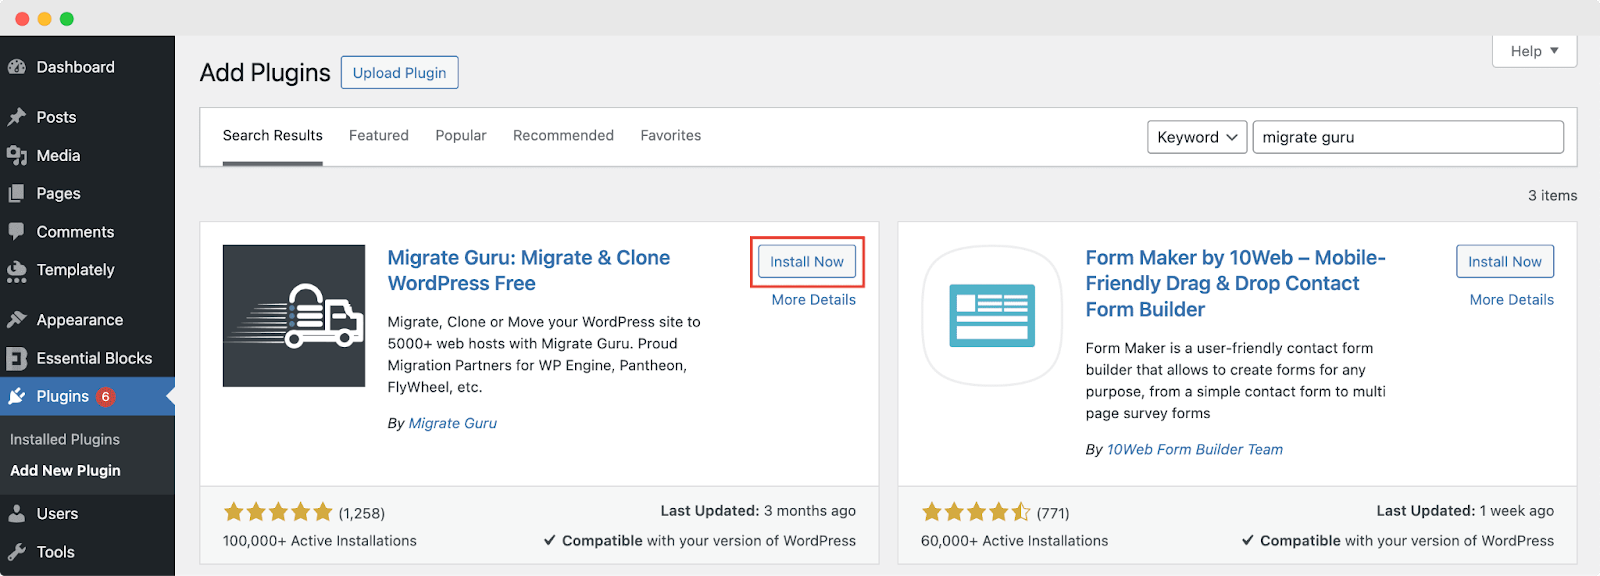 Migrate WordPress From Shared Hosting To Cloud Server